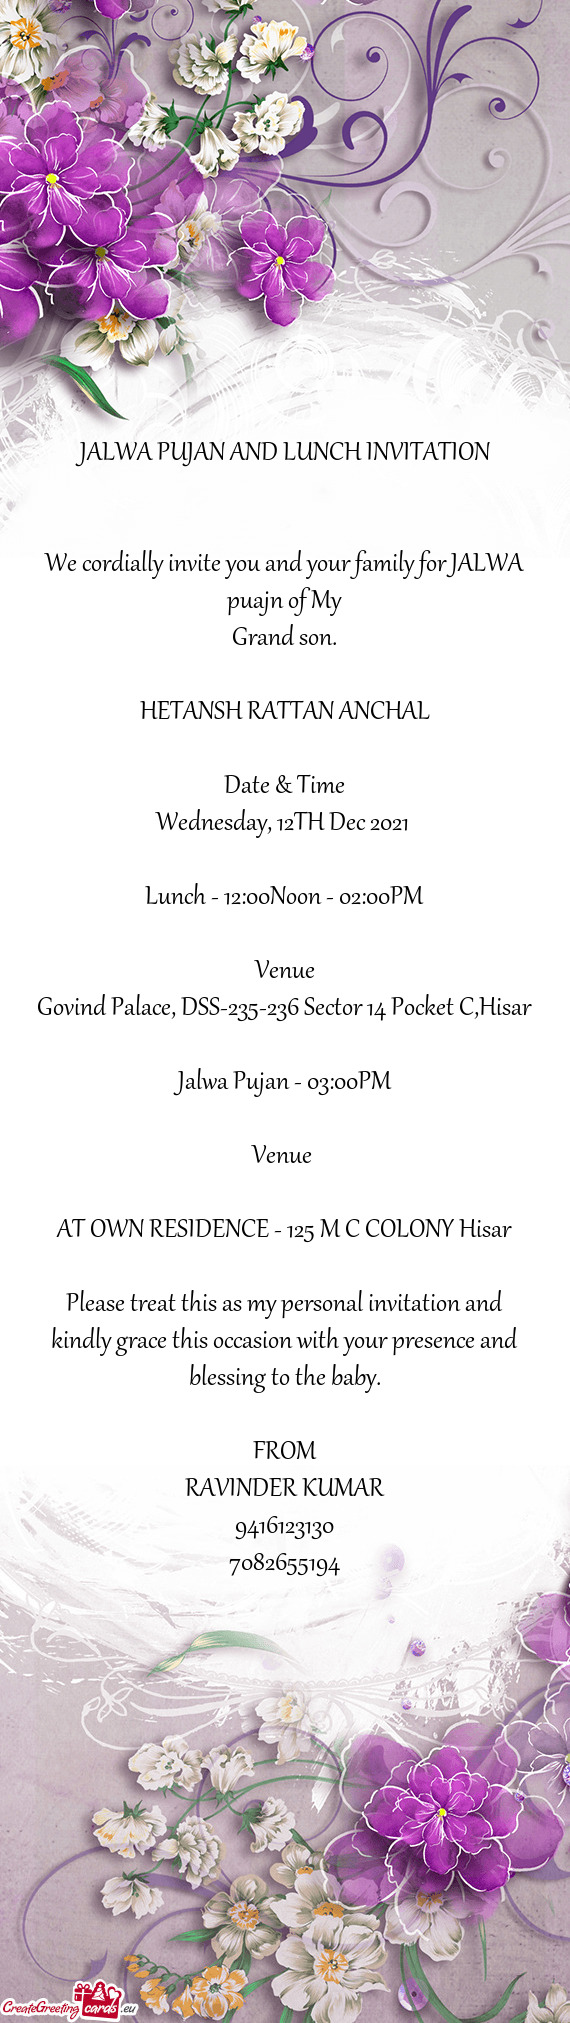 JALWA PUJAN AND LUNCH INVITATION